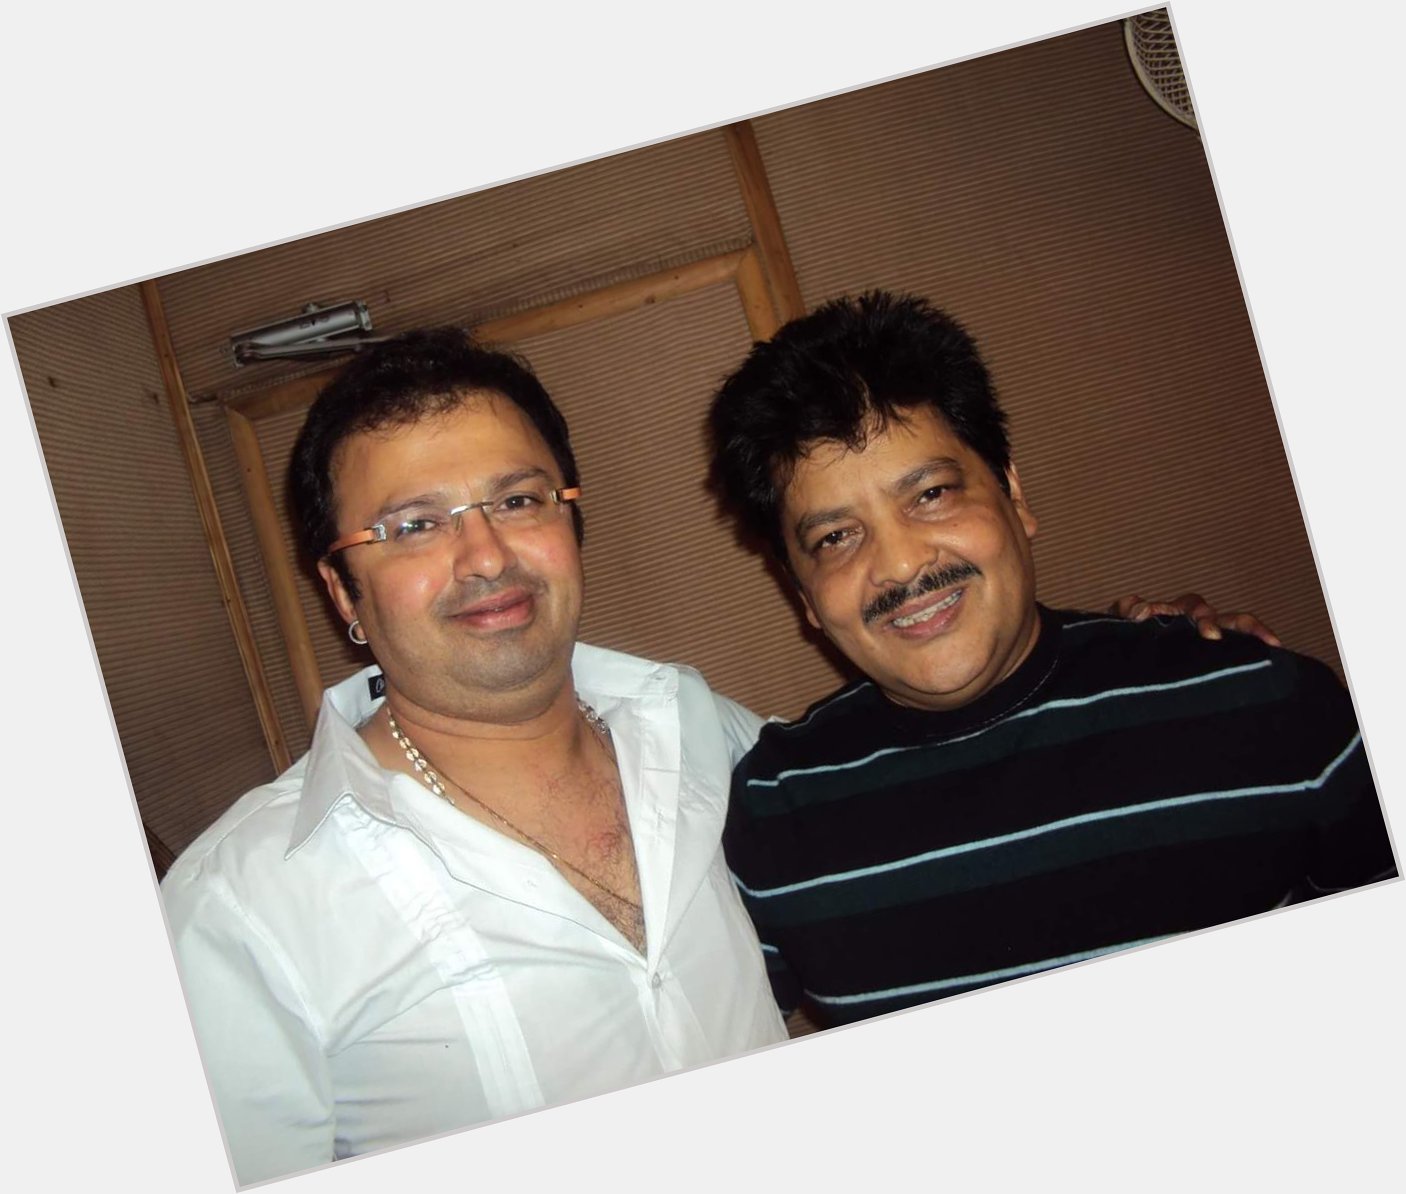 Wishing udit narayan a very very happy birthday and loads of success.God bless. Great singer and human being. 